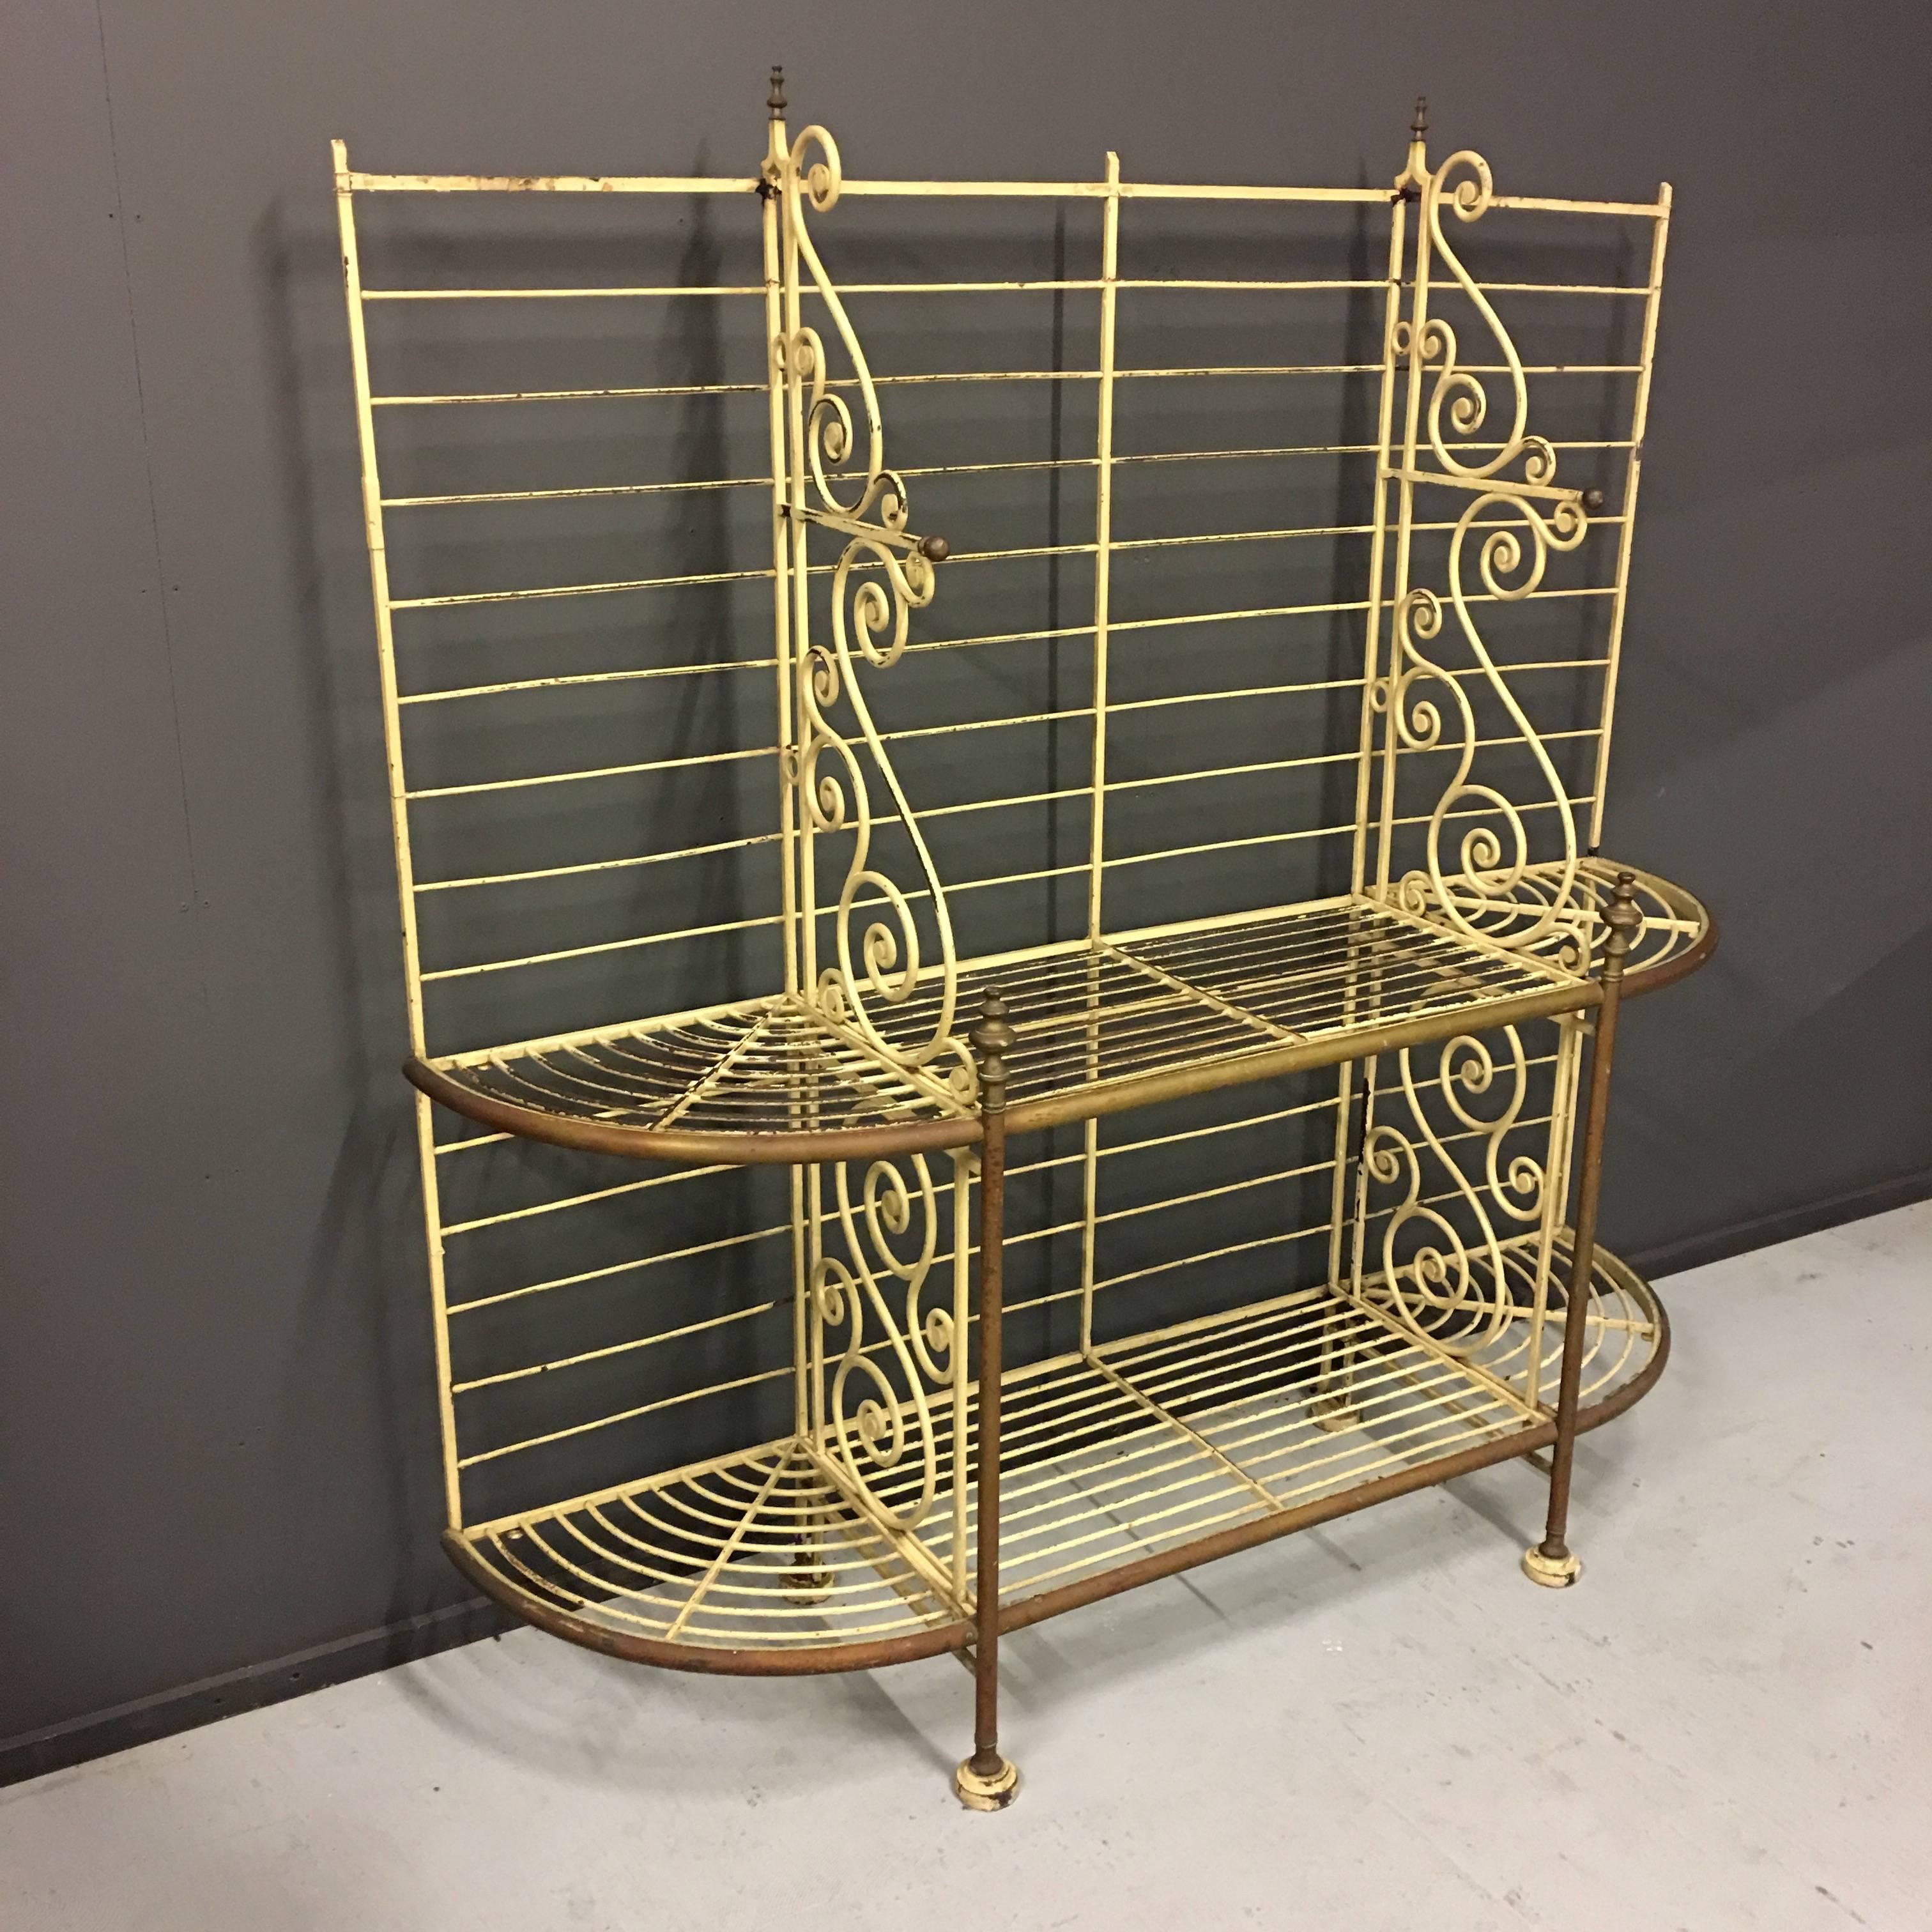 Antique bakers rack. Manufactured in France during the 1920s. Made of metal with brass details.